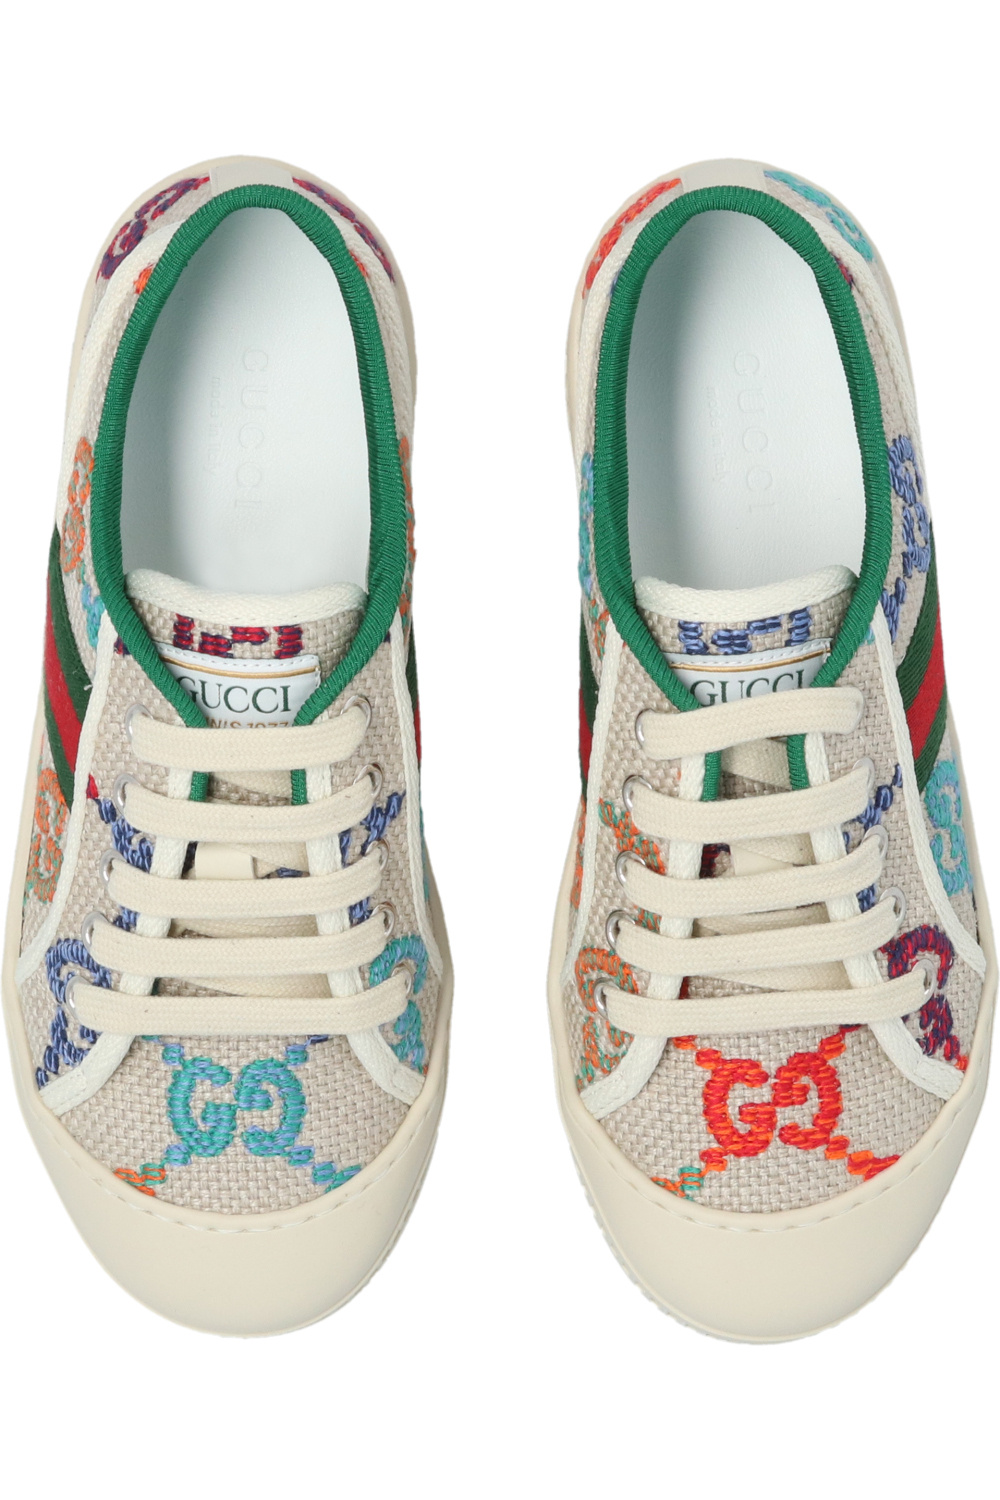 gucci that Kids ‘Tennis 1977’ sneakers